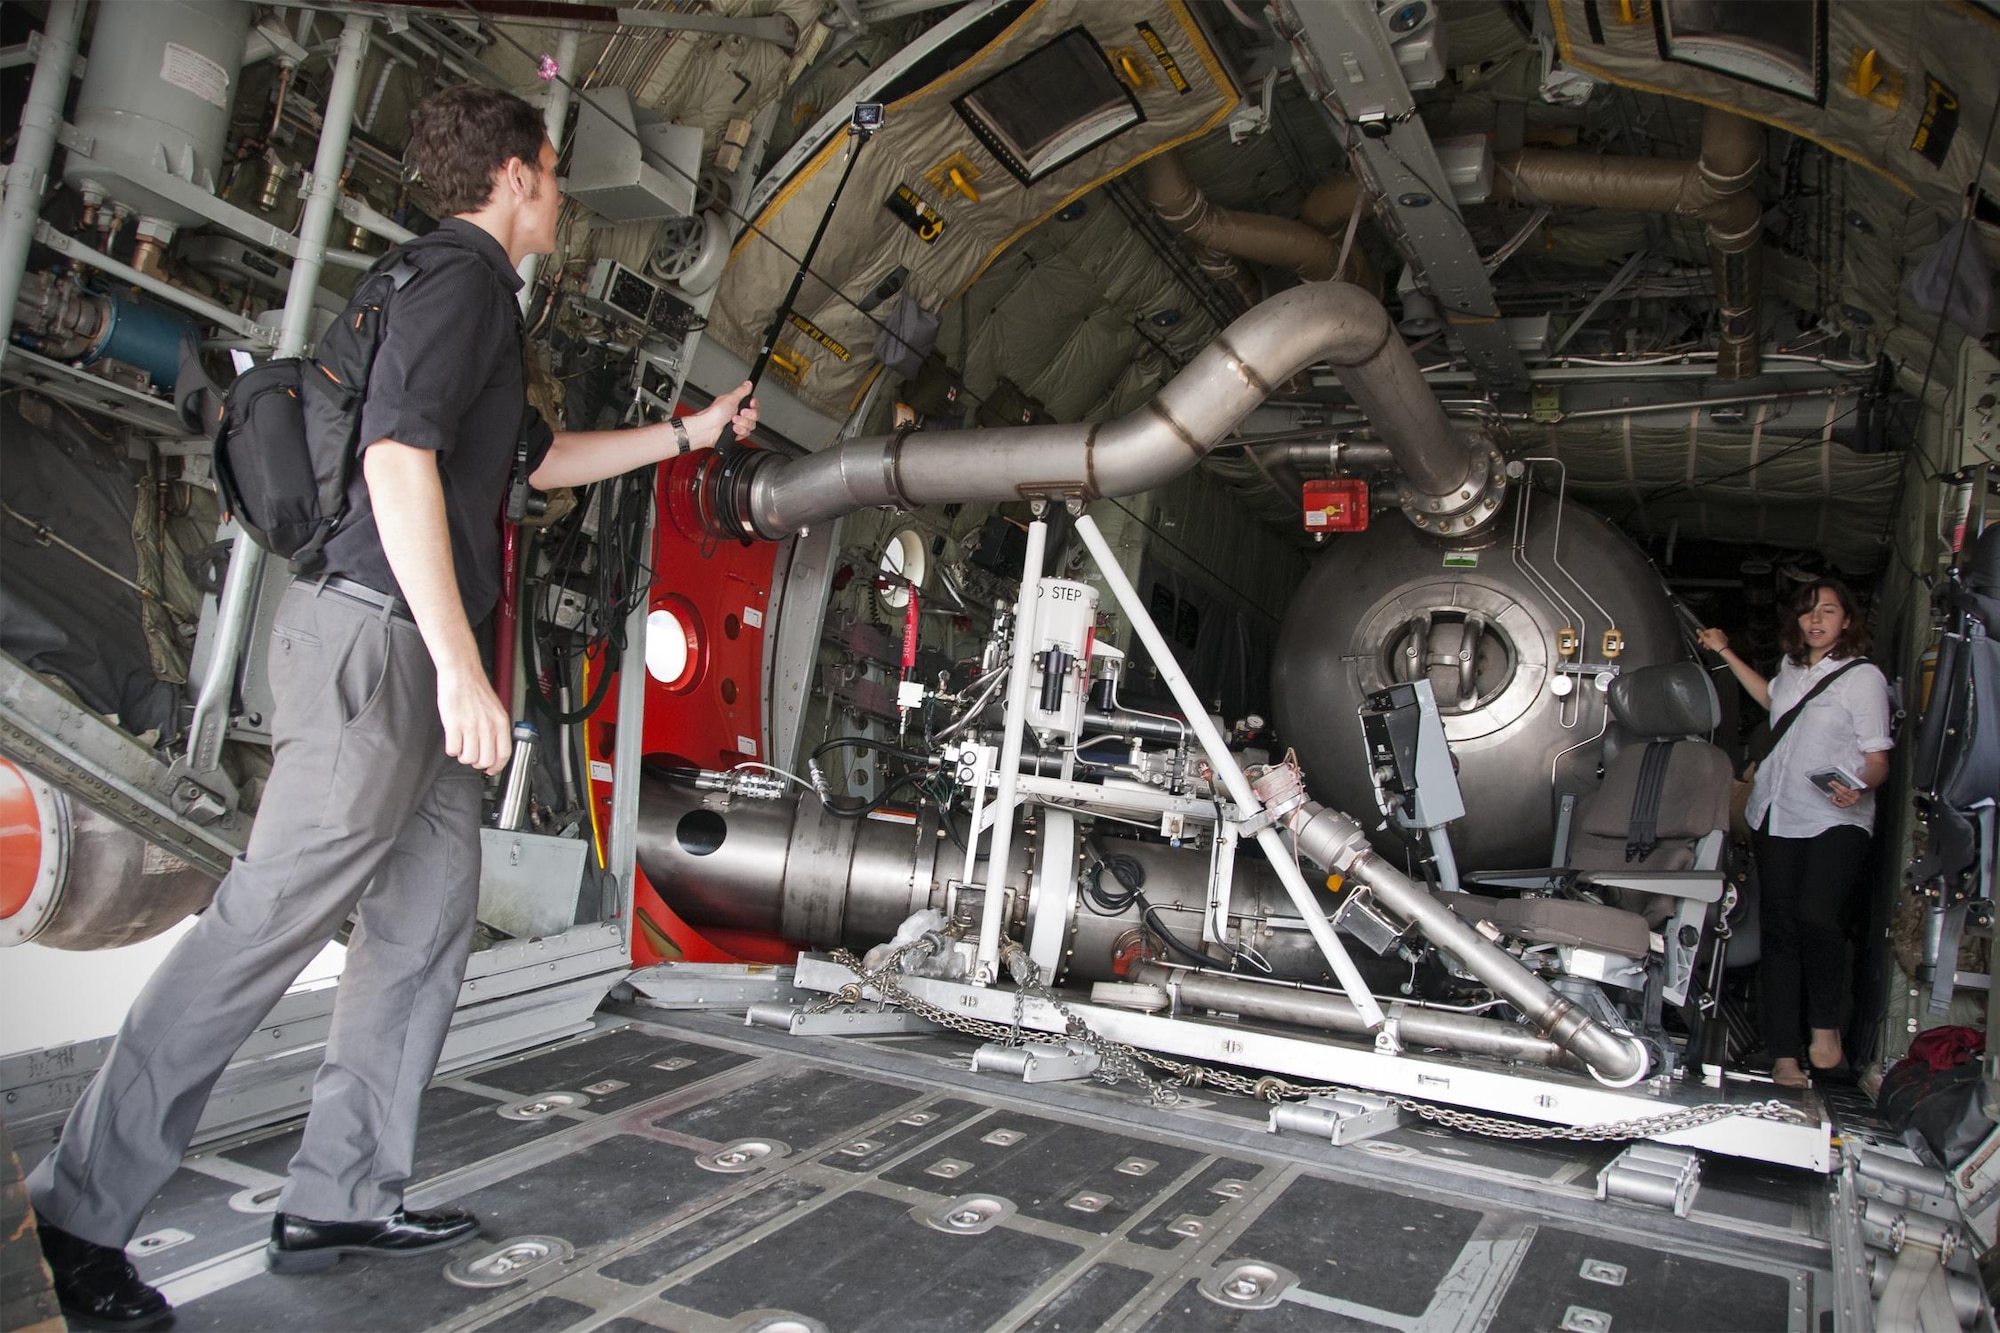 James Drew, Aviation Week defense editor (left), captures footage with a handheld camera of the S-duct fire suppression system inside a 302nd Airlift Wing C-130 Hercules on the Joint Base Andrews, Md., flight line June 28, 2016. In honor of the 100th anniversary of U.S. air reserve power, media members were invited to an event showcasing special missions conducted by C-130s in the Air Force Reserve Command, to include weather surveillance, firefighting and aerial spraying. (U.S. Air Force photo/Staff Sgt. Kat Justen)